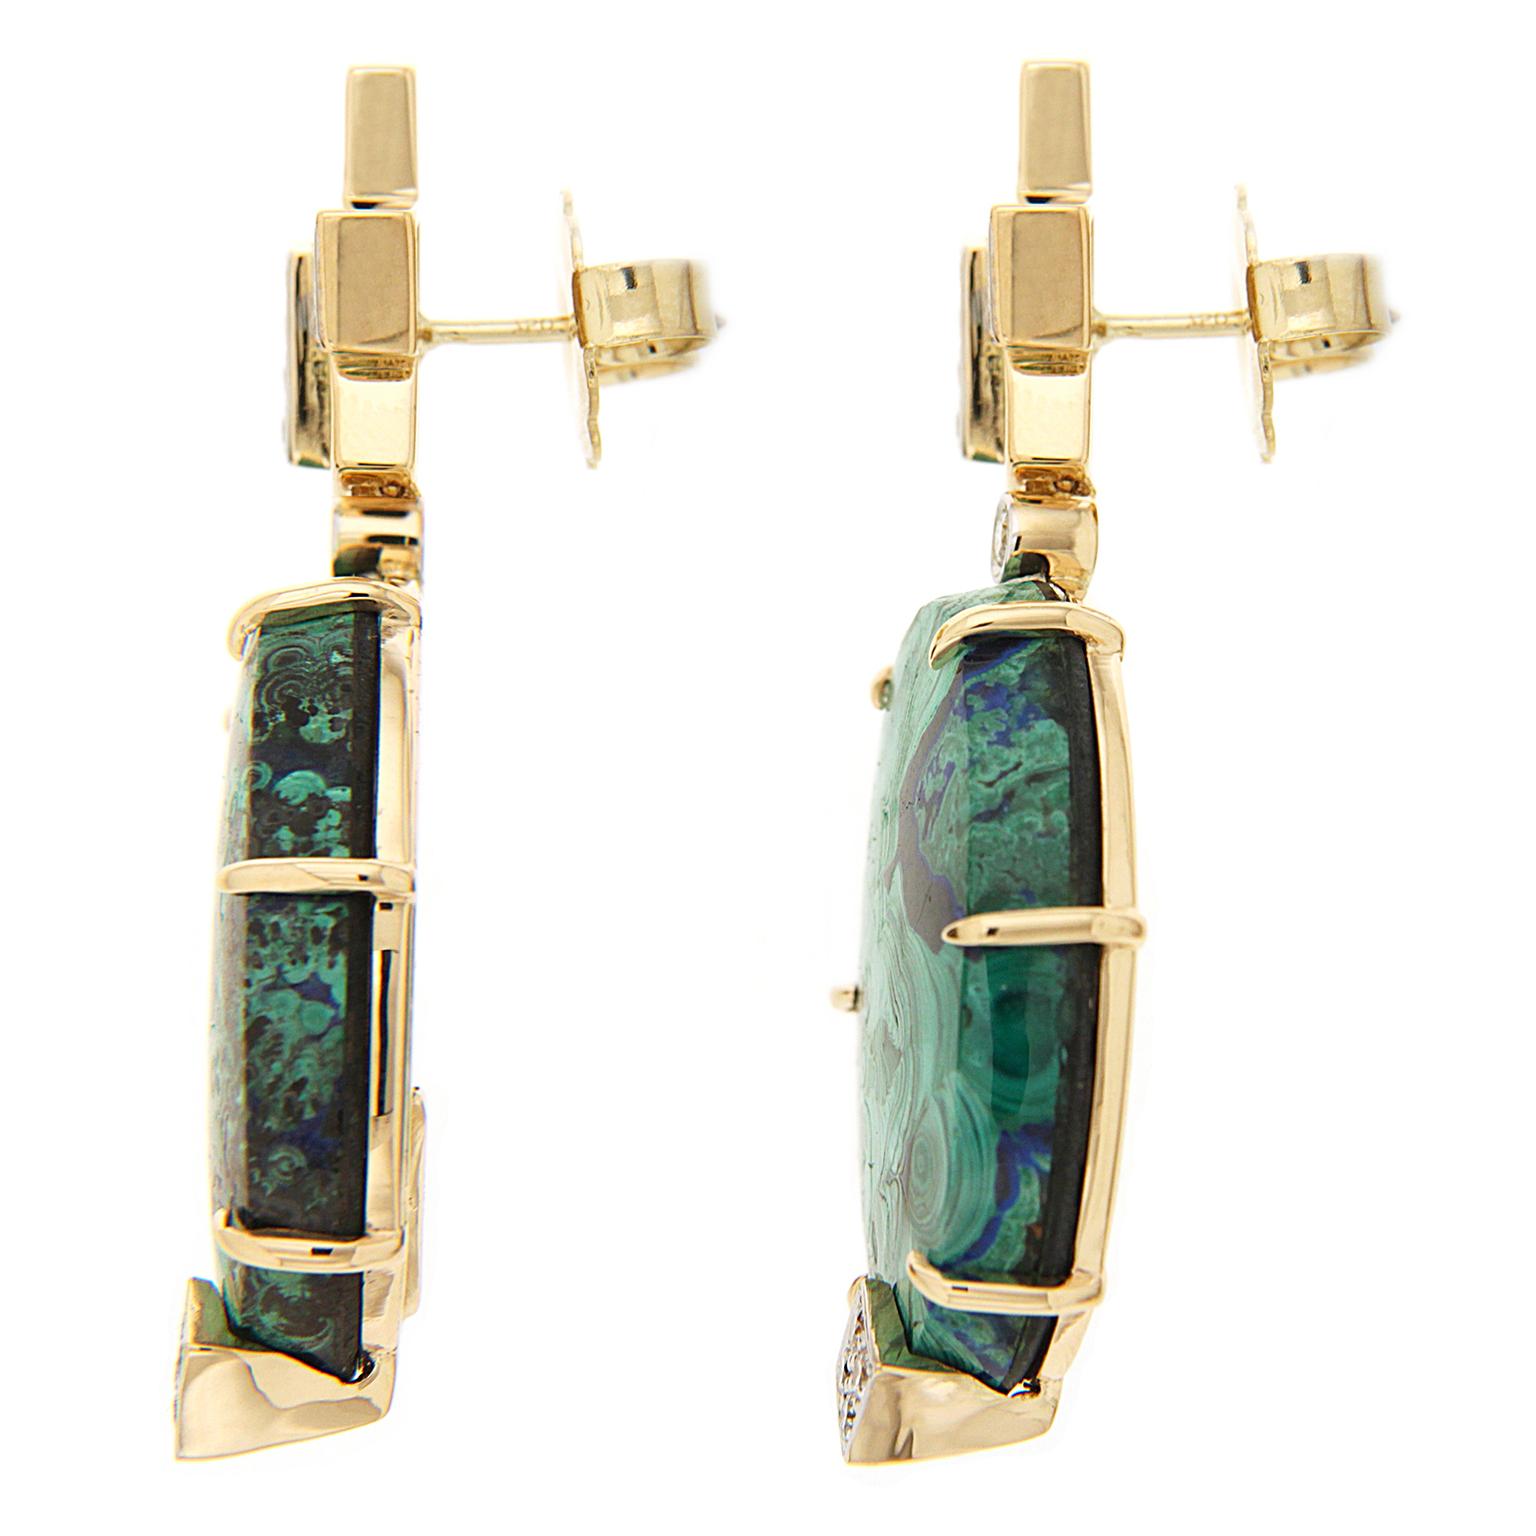 The intense blue of azurite revolves within the deep green of malachite for a breathtaking gem, contrasted by gold and diamonds. Beginning the design, four 18k yellow-gold rectangles overlap. The bottom and front rectangles are embellished with